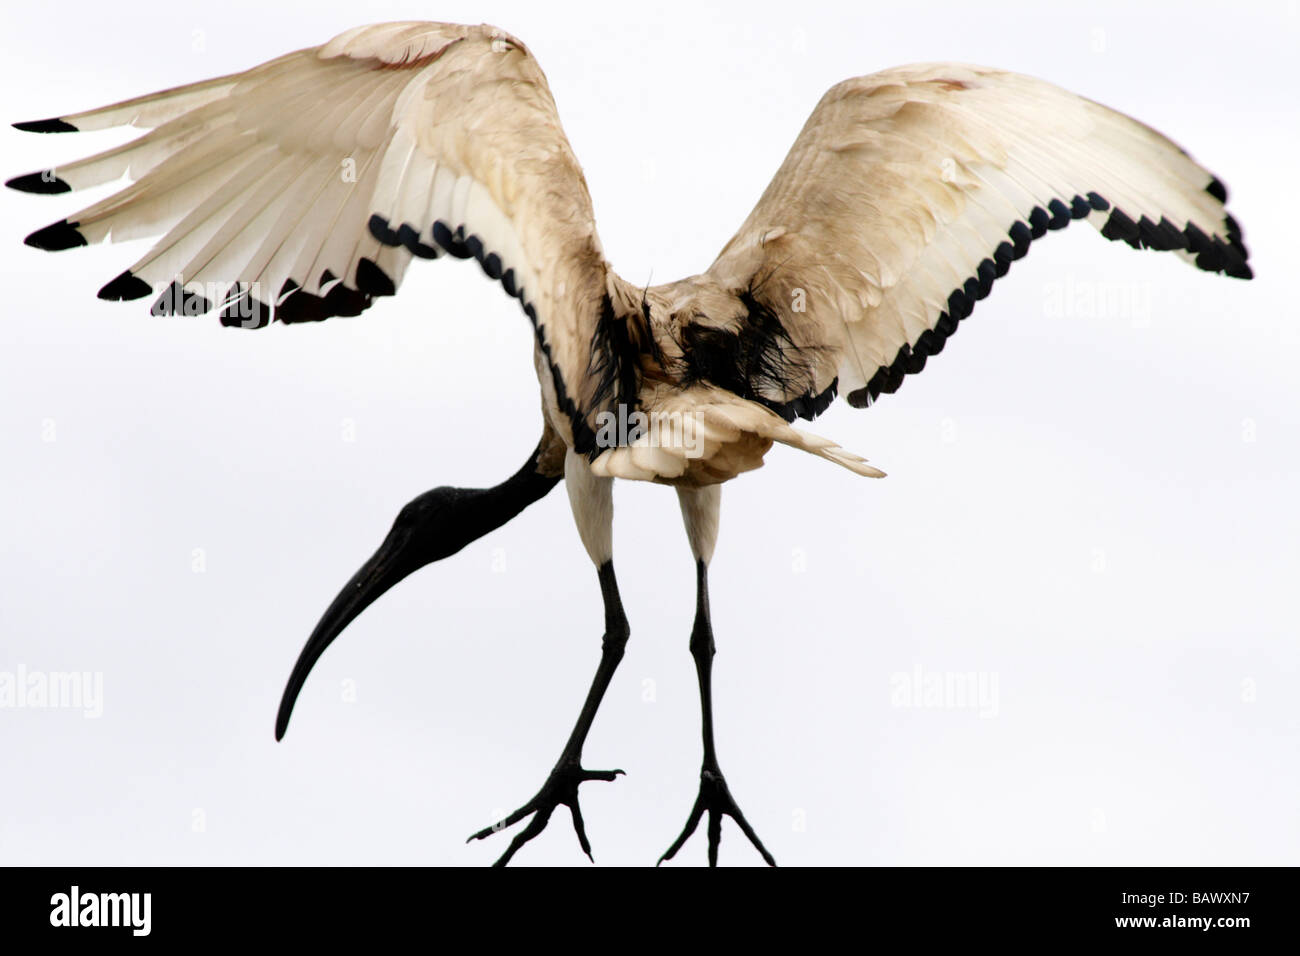 Sacred Ibis An African Sacred Ibis in full flight Stock Photo